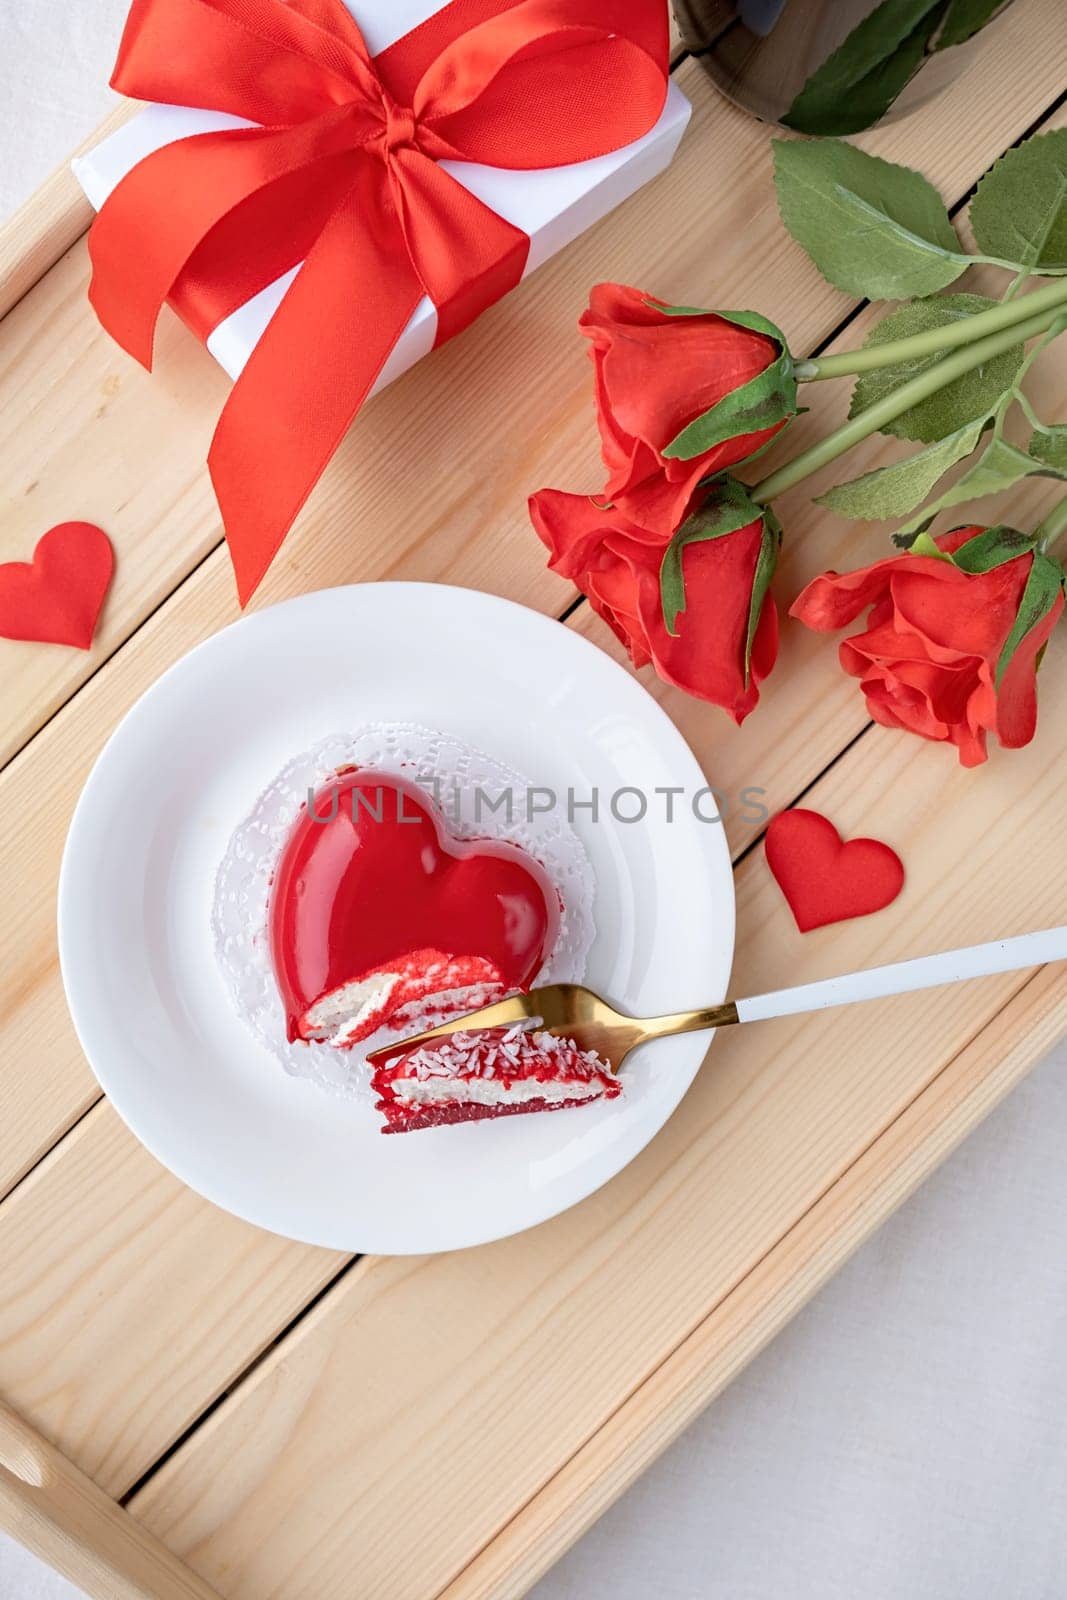 Valentines day. heart shaped glazed valentine cake and flowers in wooden tray